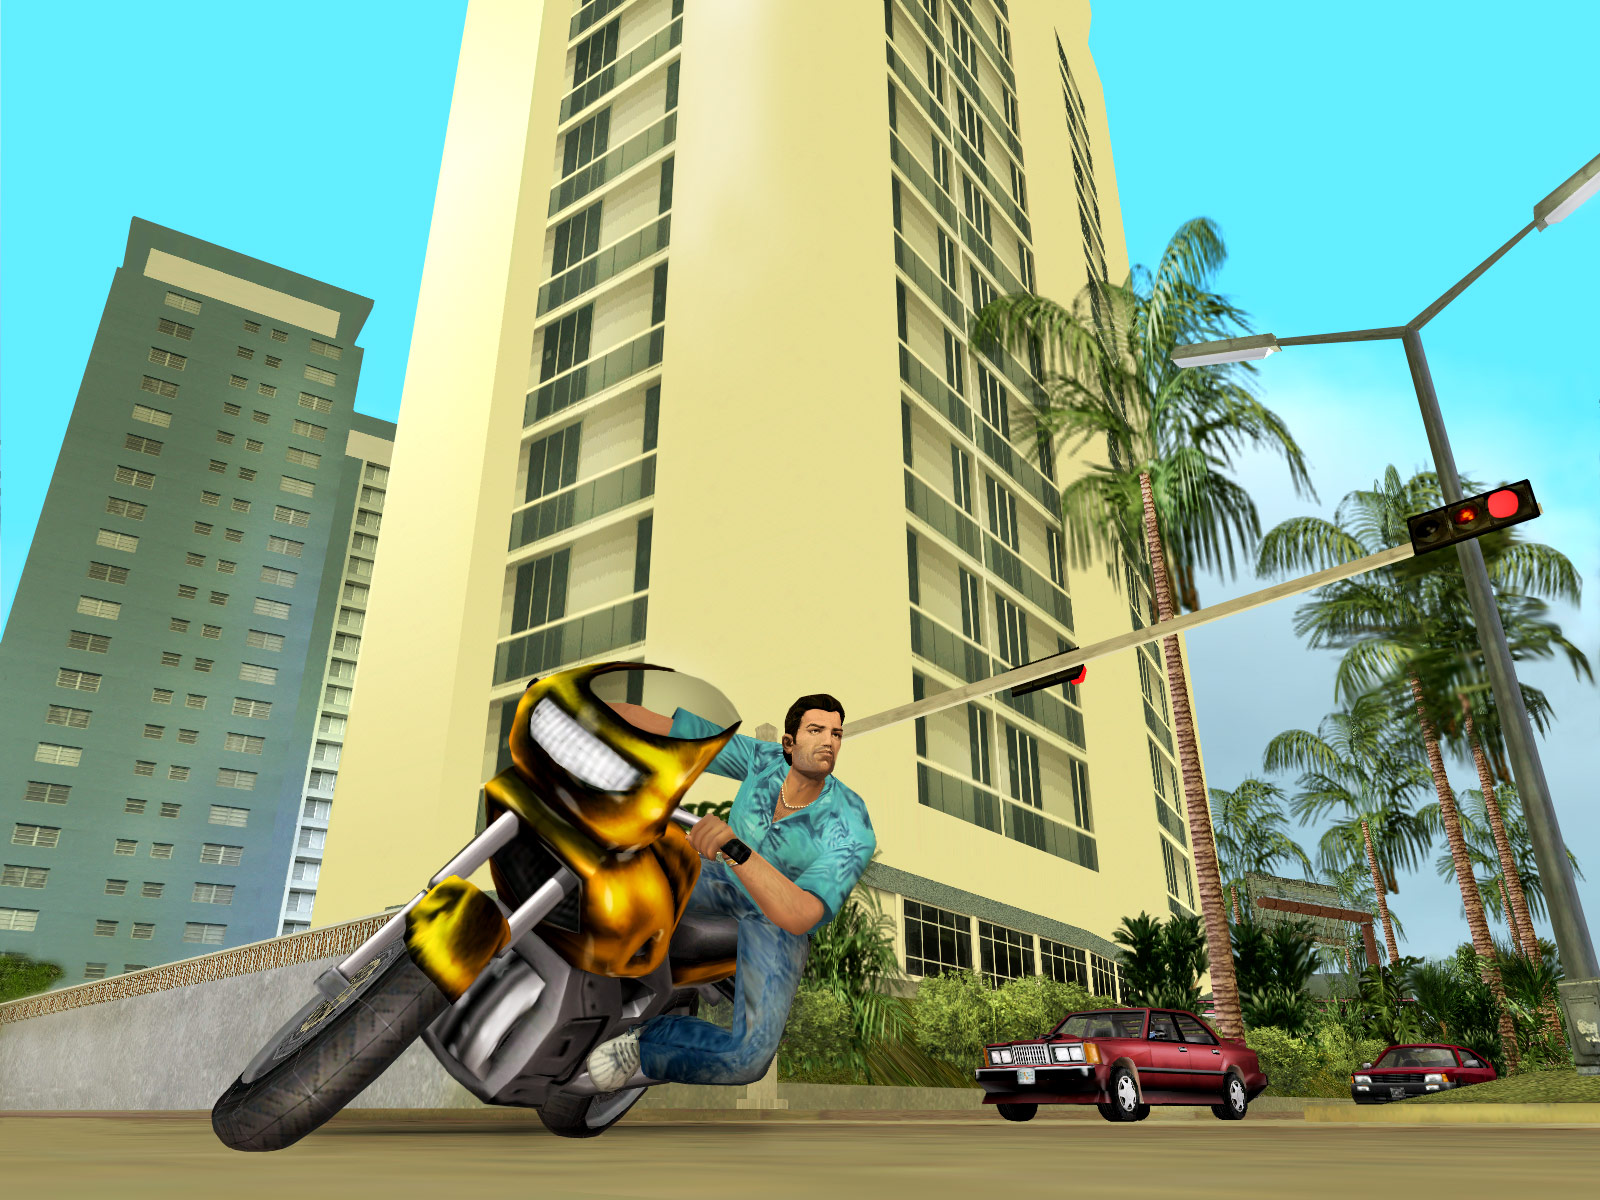 Vc play. Grand Theft auto: vice City. Grand Theft auto вай Сити. GTA vice City Grand Theft auto. Grand Theft auto vice City 2022.